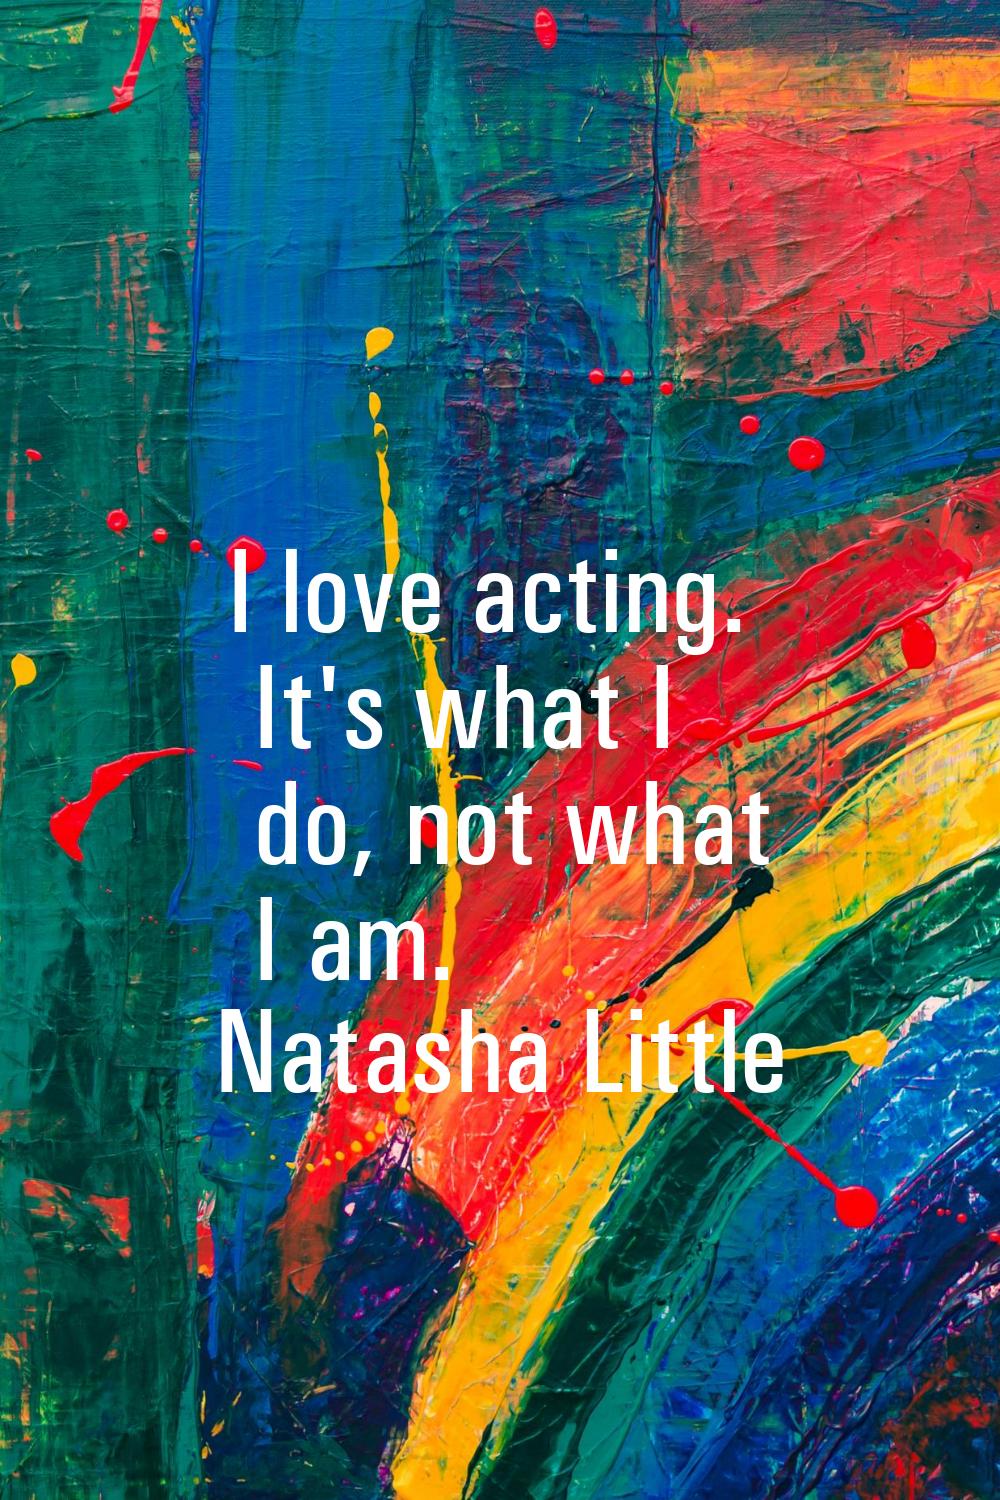 I love acting. It's what I do, not what I am.